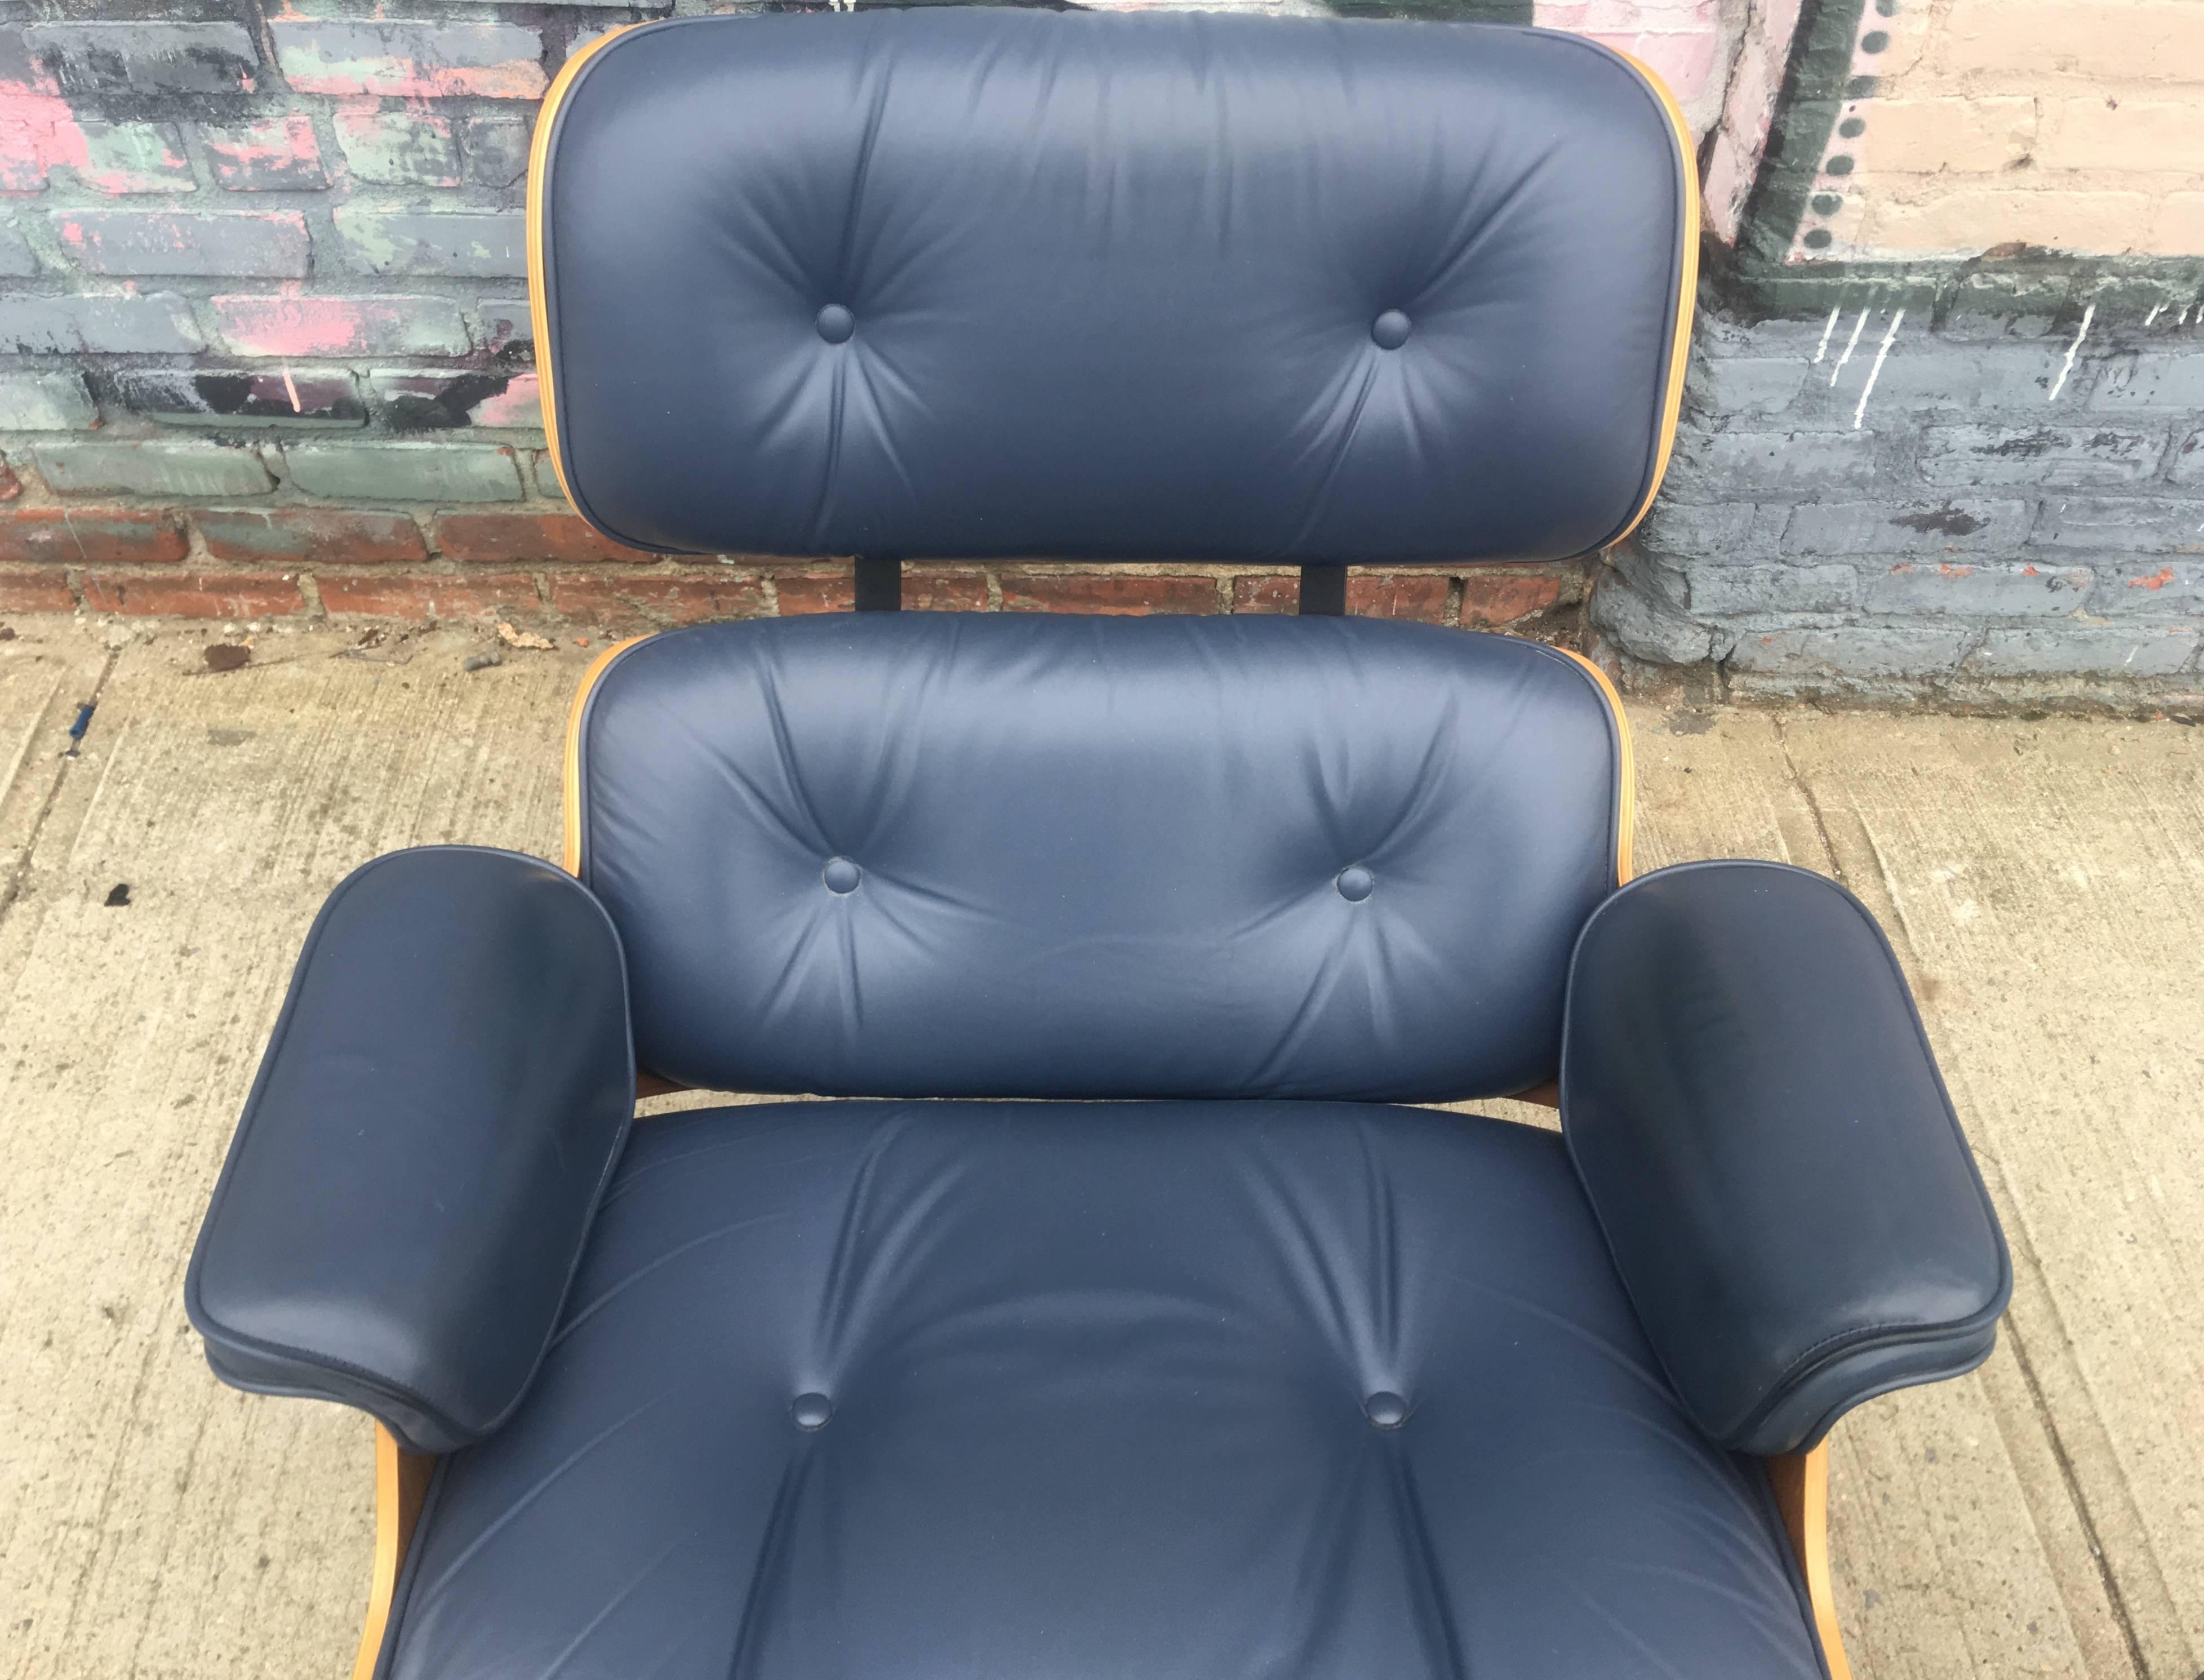 Perfect Herman Miller Eames lounge chair and ottoman in custom blue leather. Walnut shells in perfect condition with warm tones and gorgeous grain detail. We have only come across this color on one other occasion. Signed on chair and ottoman.